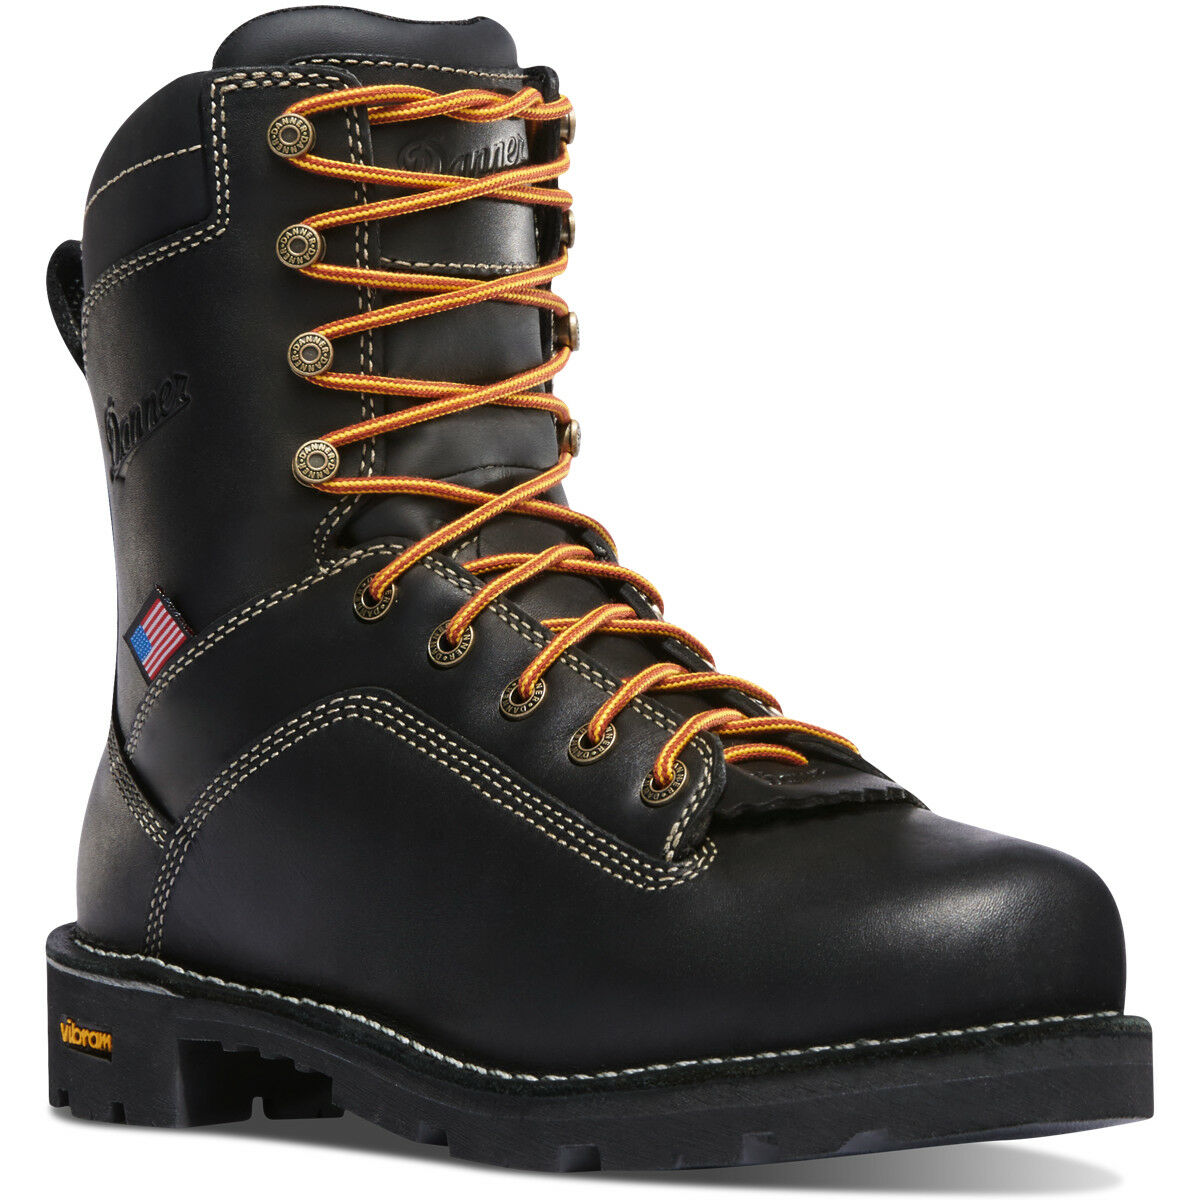 Men's USA Black Quarry Alloy Toe Work Boot - Work Boots Safety Toe ...